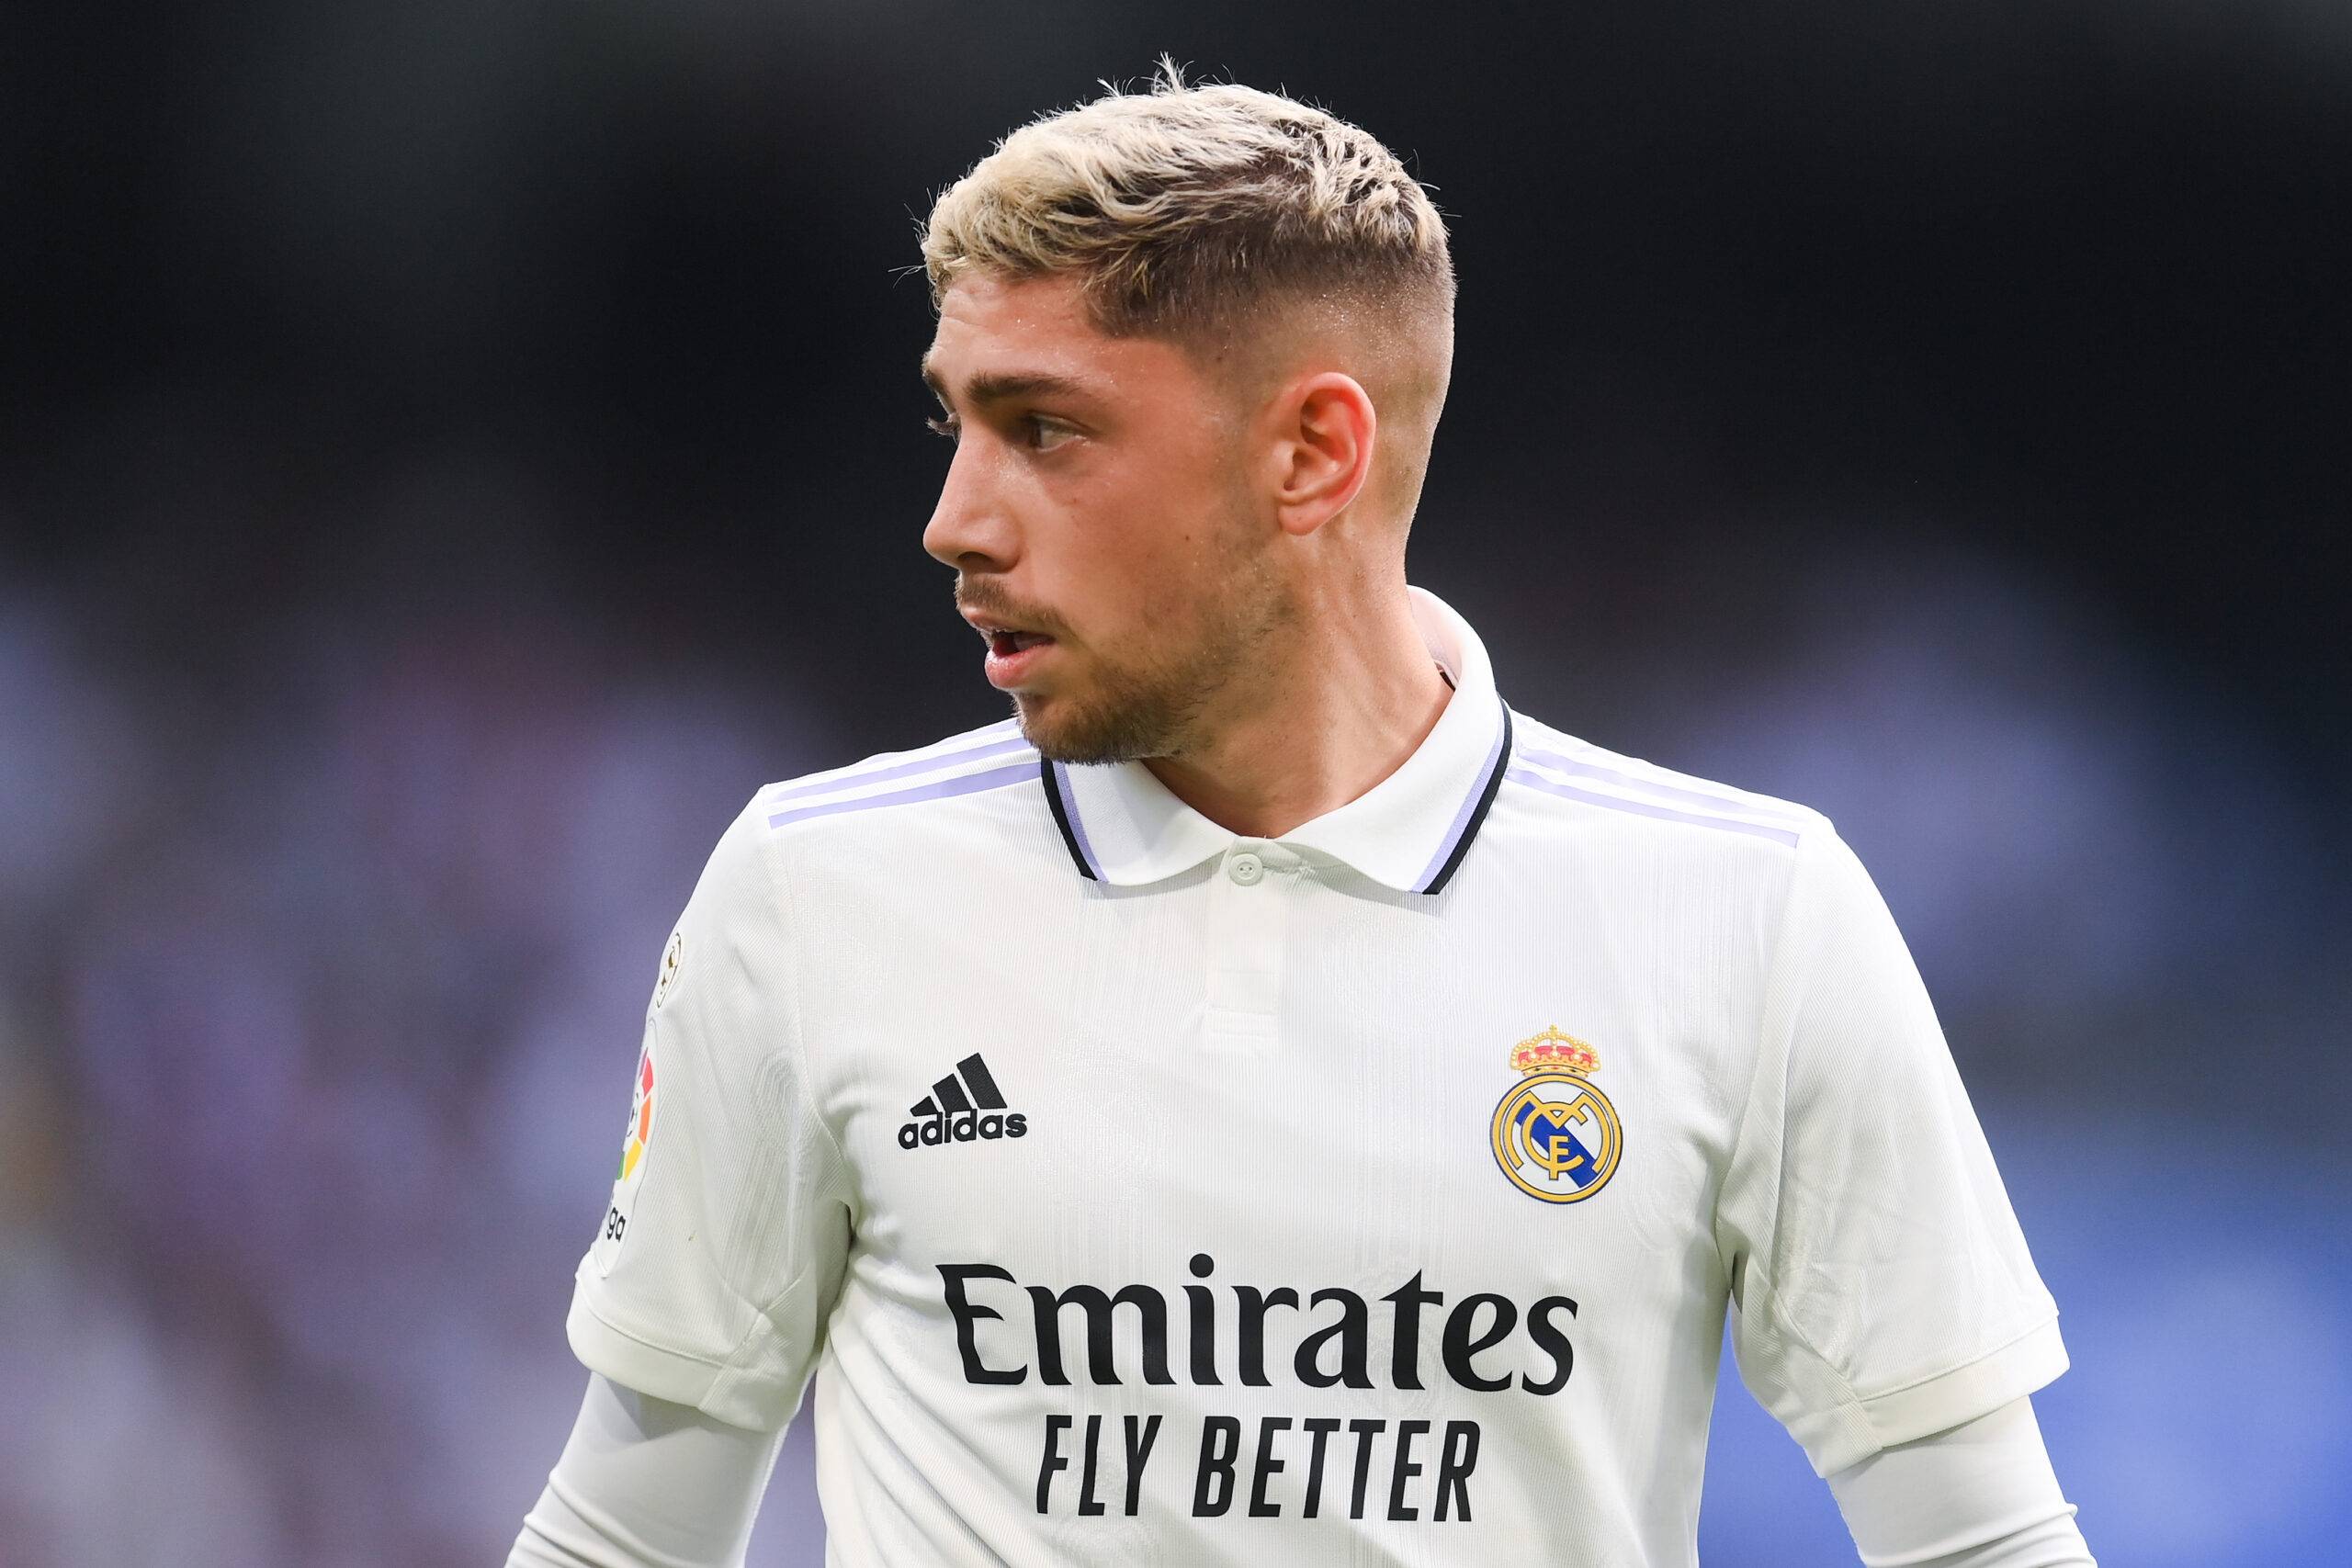 Football fans want Papu Gomez banned for ‘disgusting’ tackle on Real Madrid’s Fede Valverde